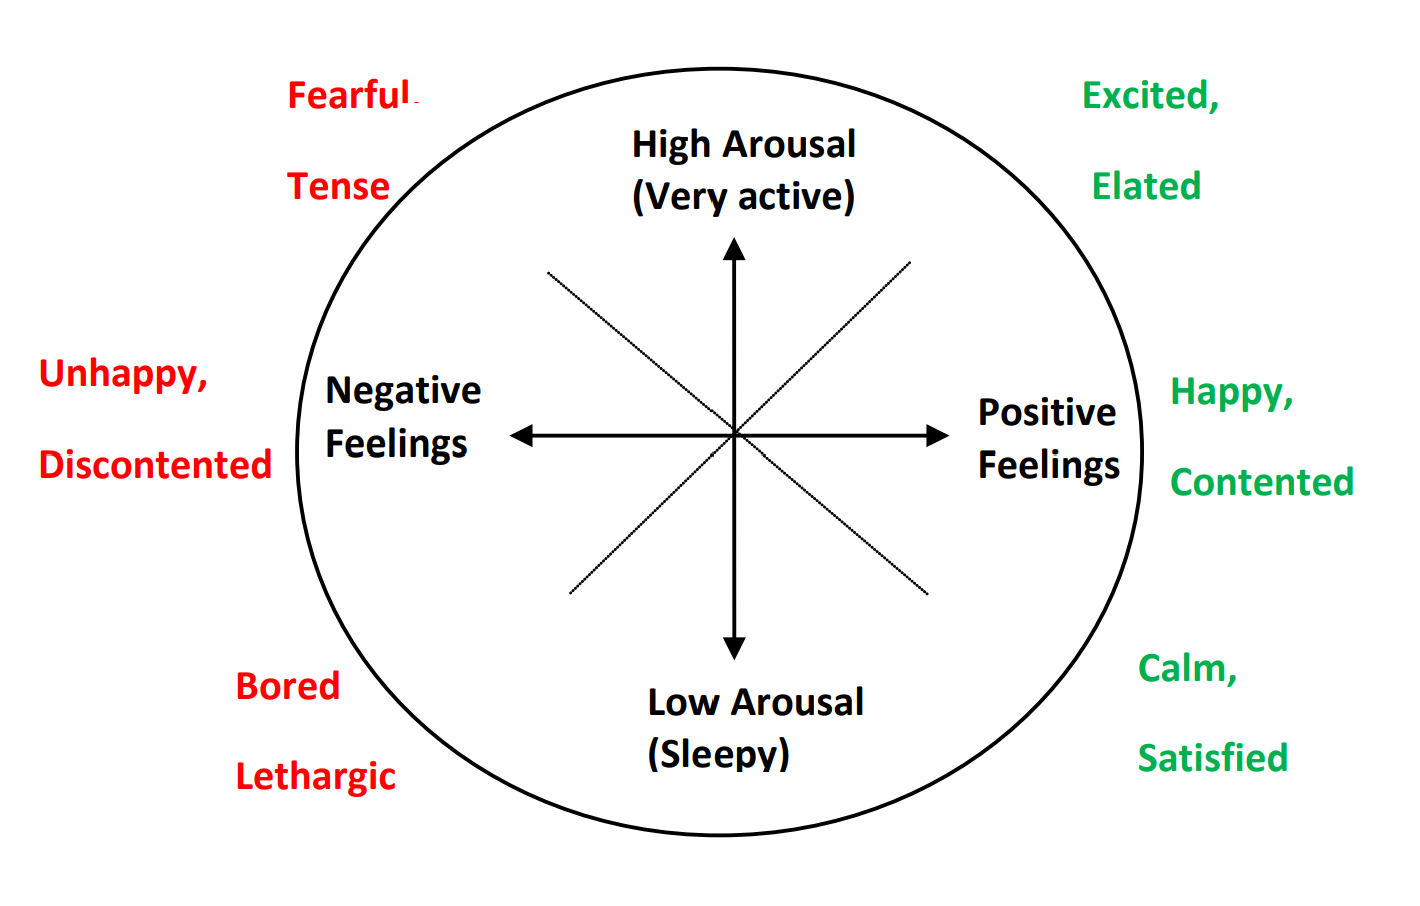 A model of emotion, defined by dimensions of activity level and negative to positive feelings.